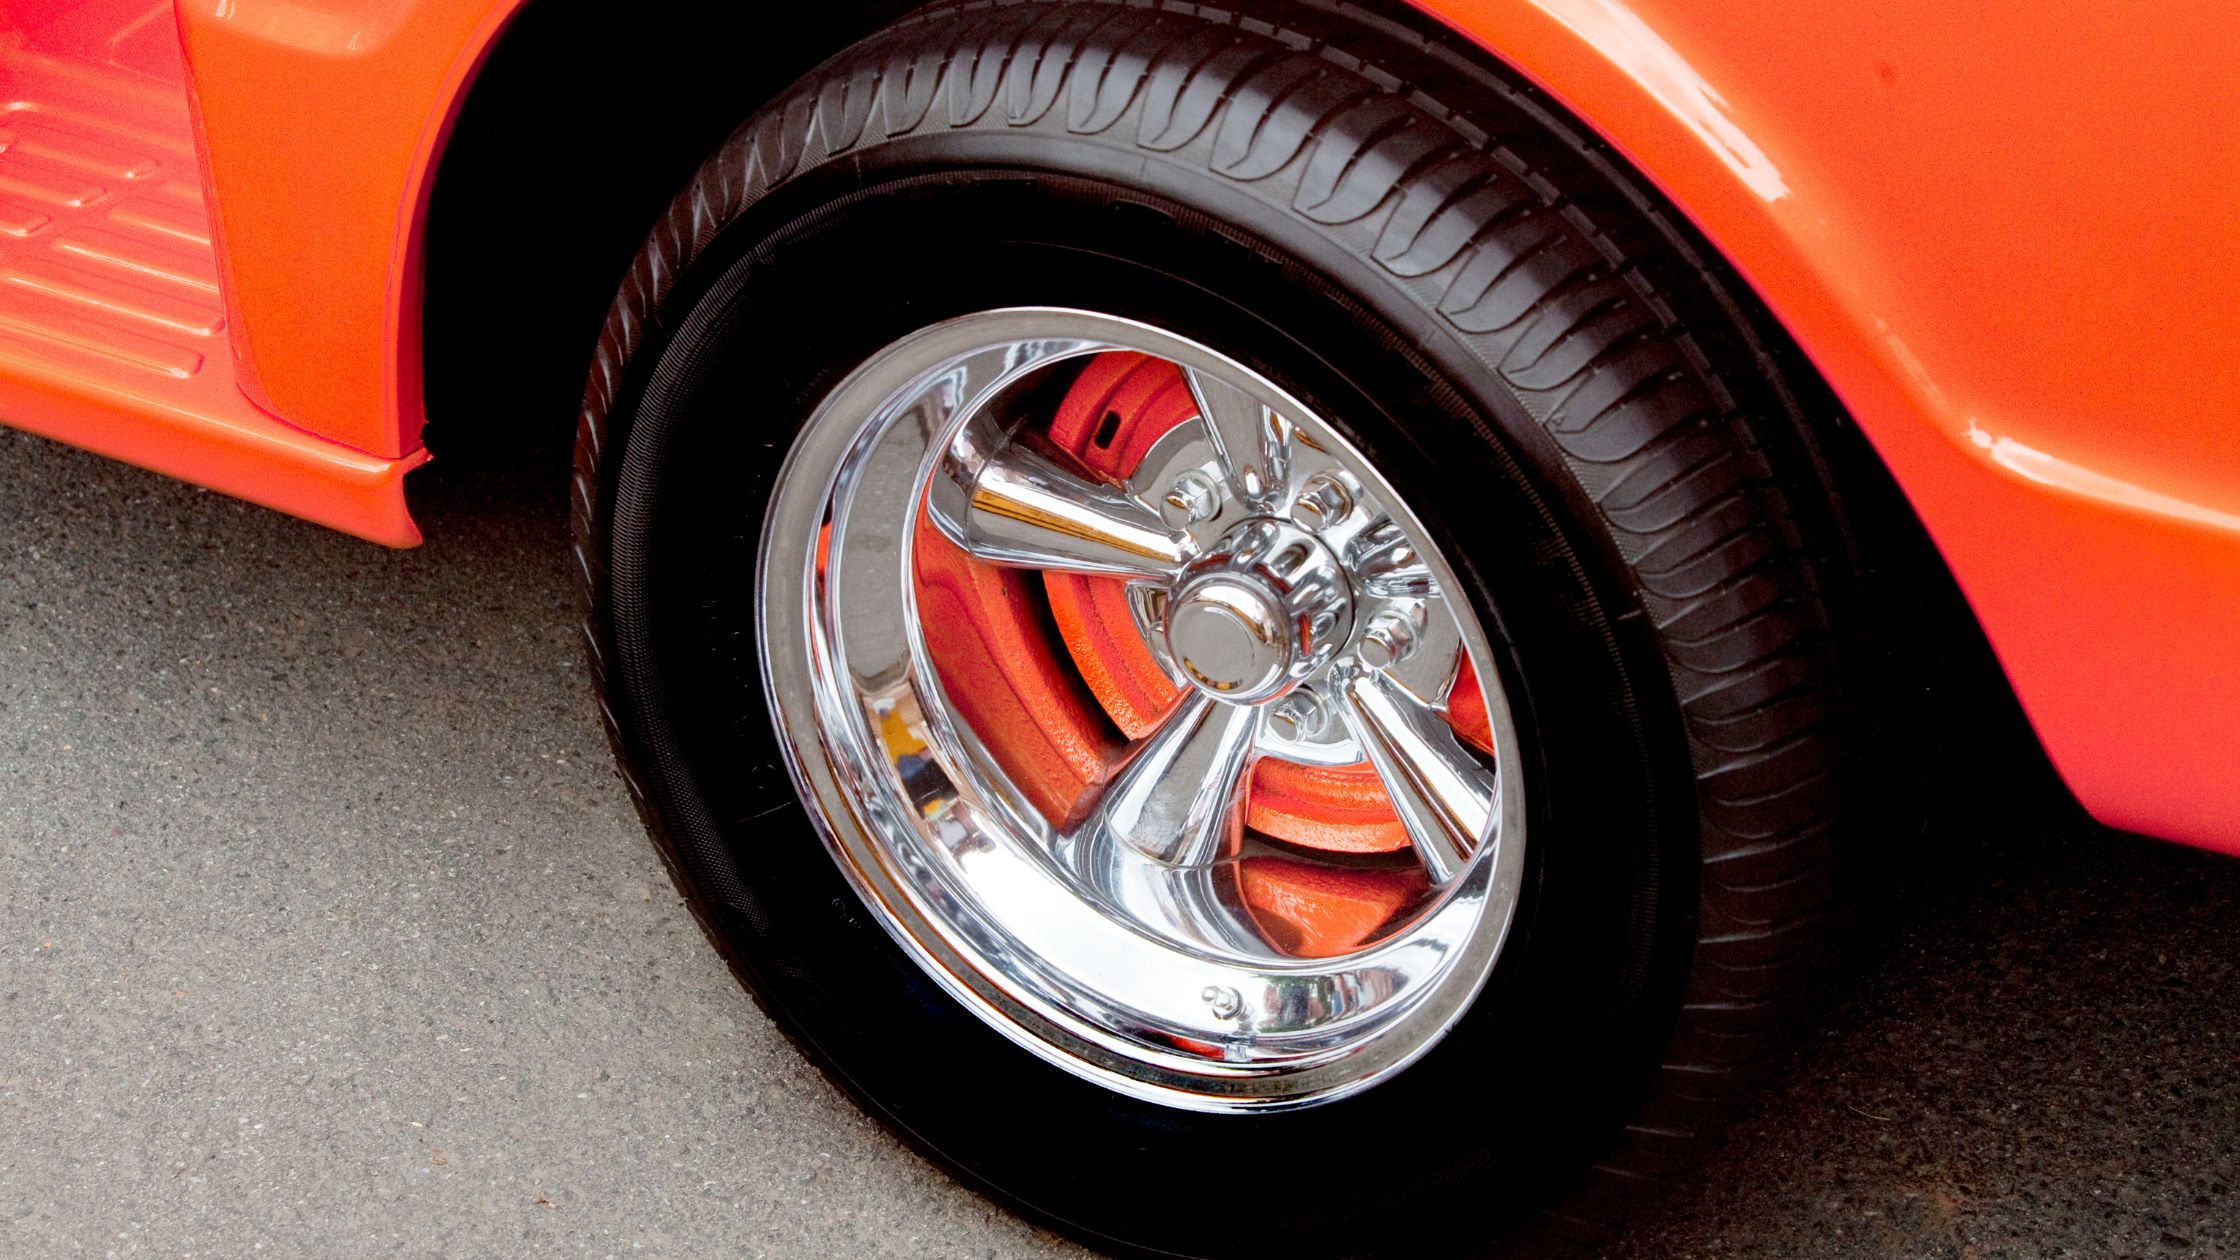 How To Pick The Right Rims For Your Car?